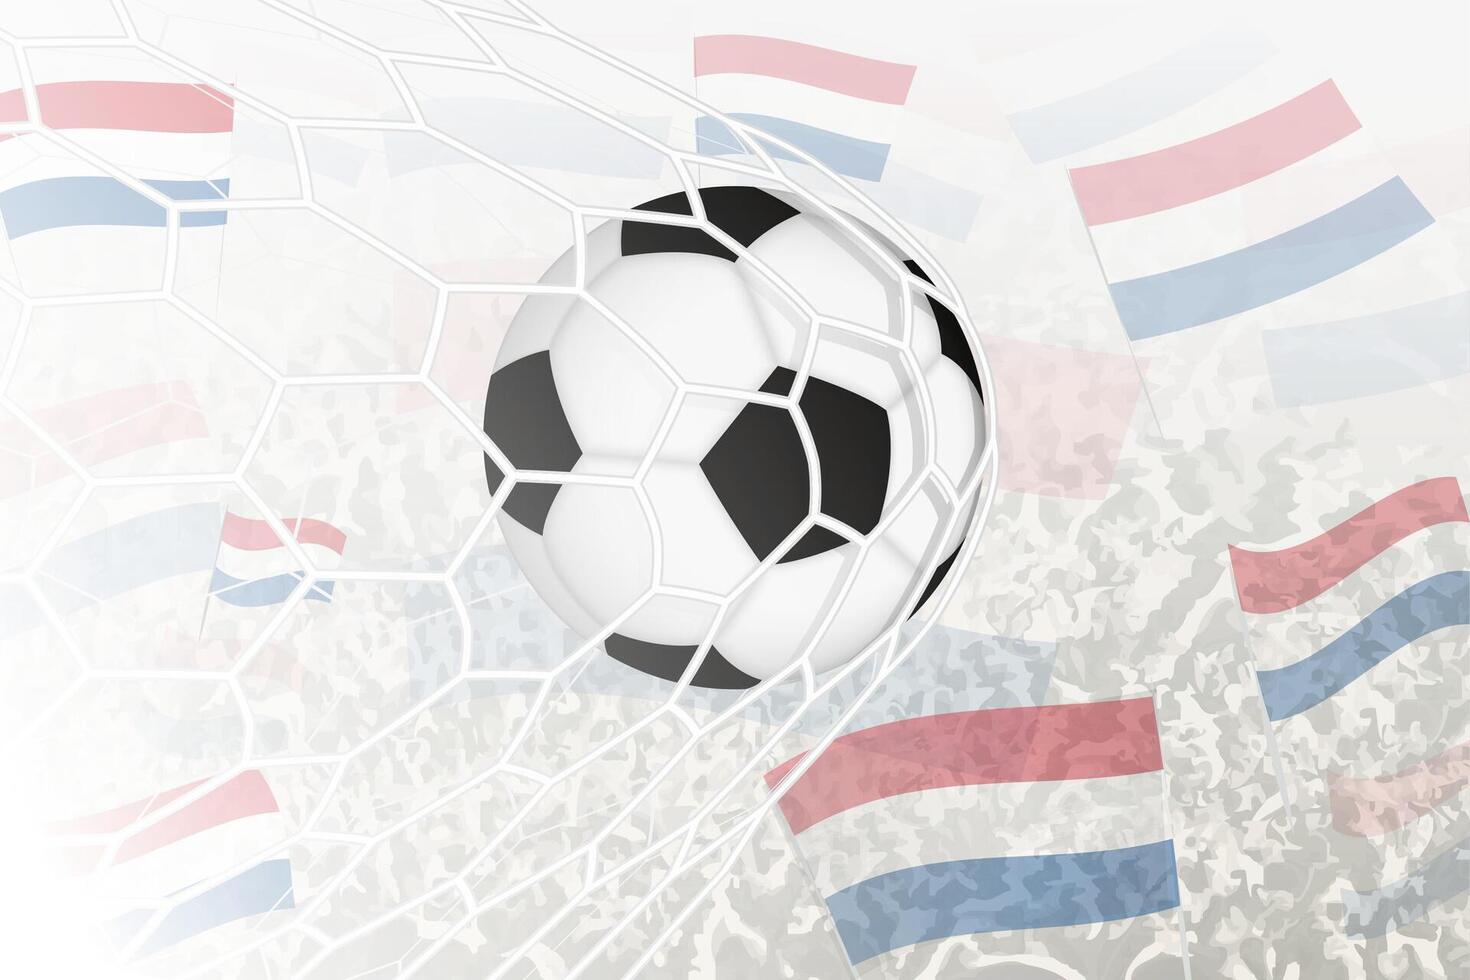 National Football team of Netherlands scored goal. Ball in goal net, while football supporters are waving the Netherlands flag in the background. vector